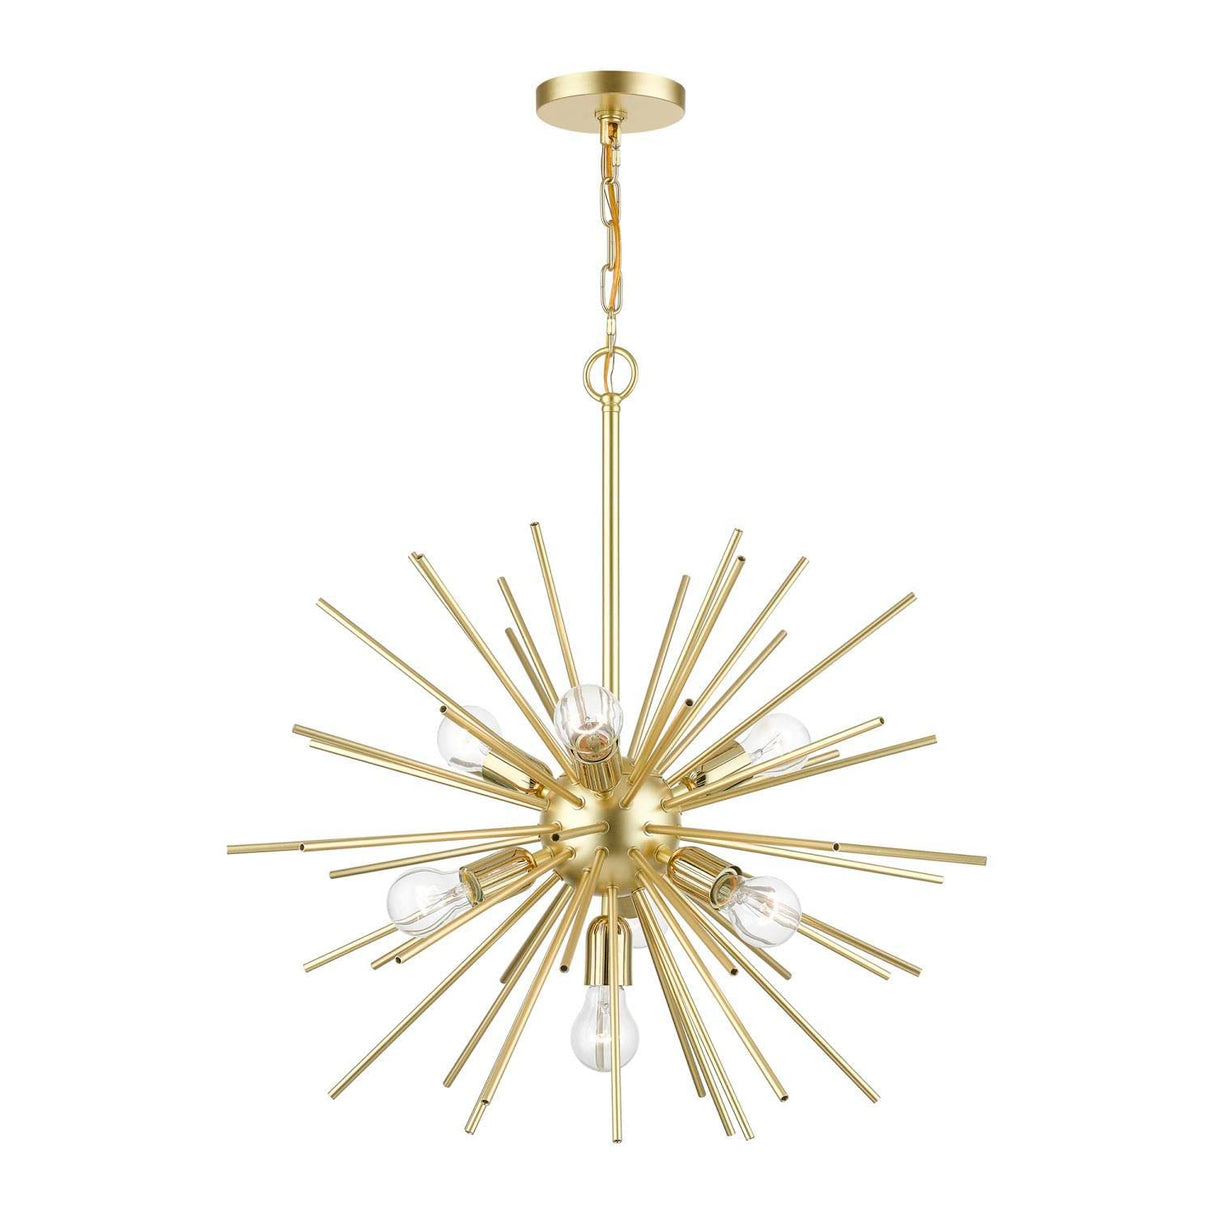 Tribeca 7 Light Pendalier in Soft Gold with Polished Brass (46175-33)